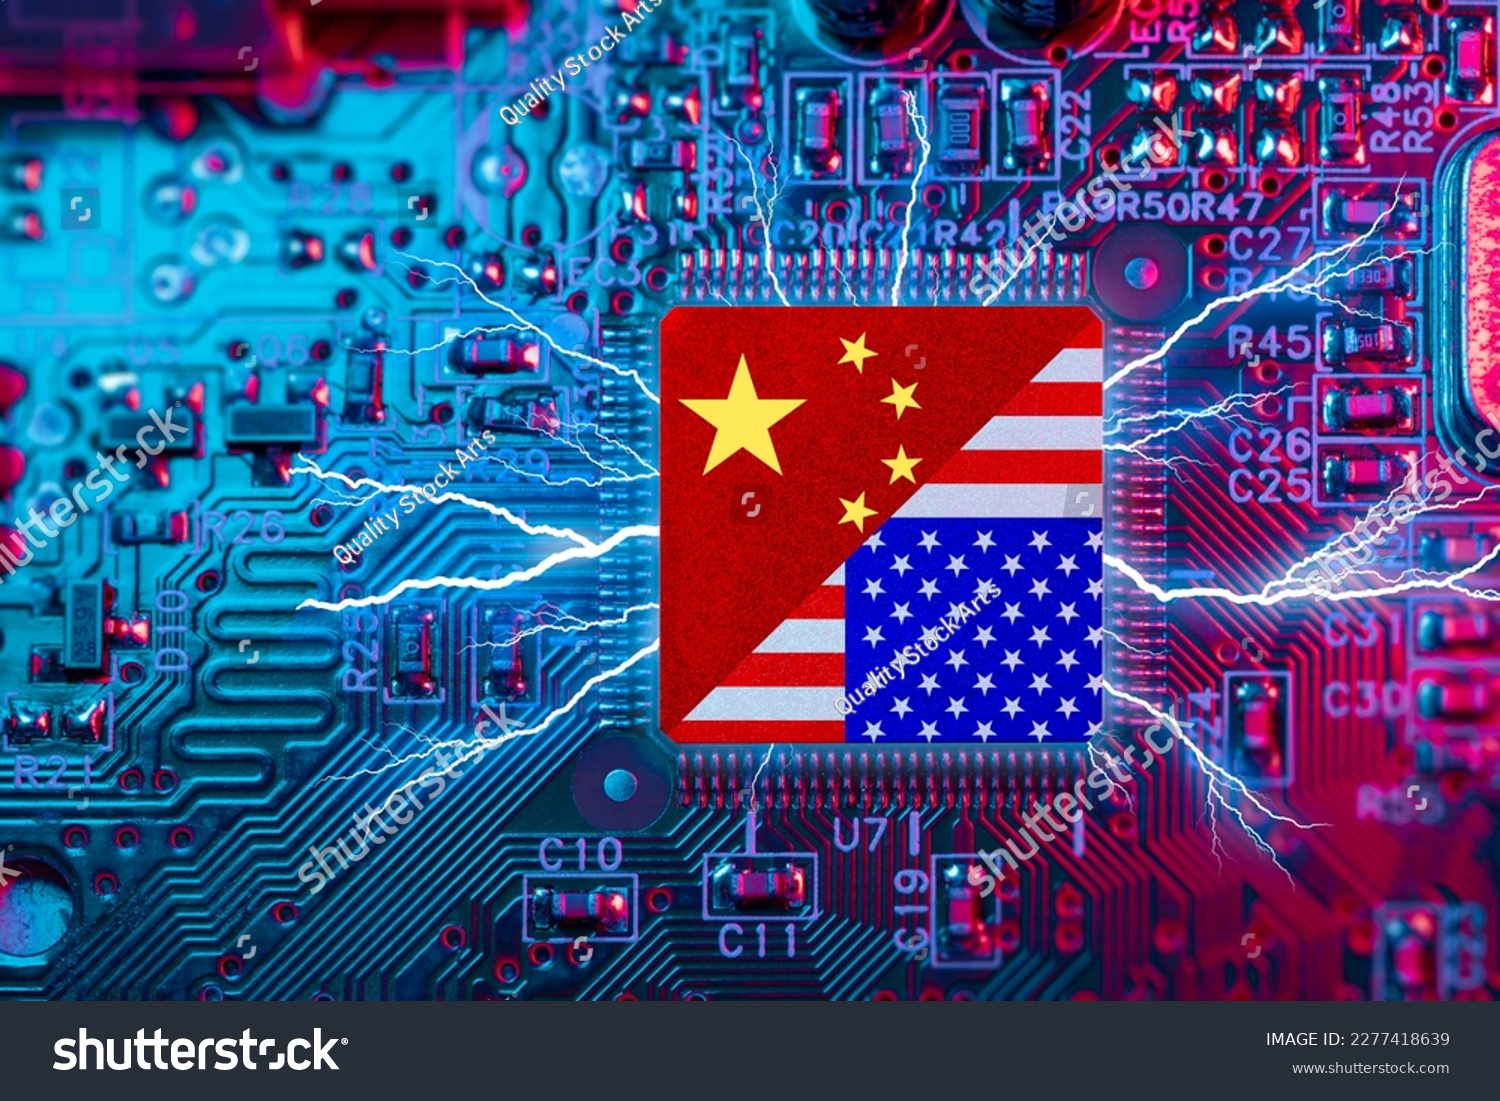 Flag USA and China on Computer CPU. Chip War Crisis, Global semiconductor technology factory fighting supply battle over chips manufacturing USA and China. #2277418639